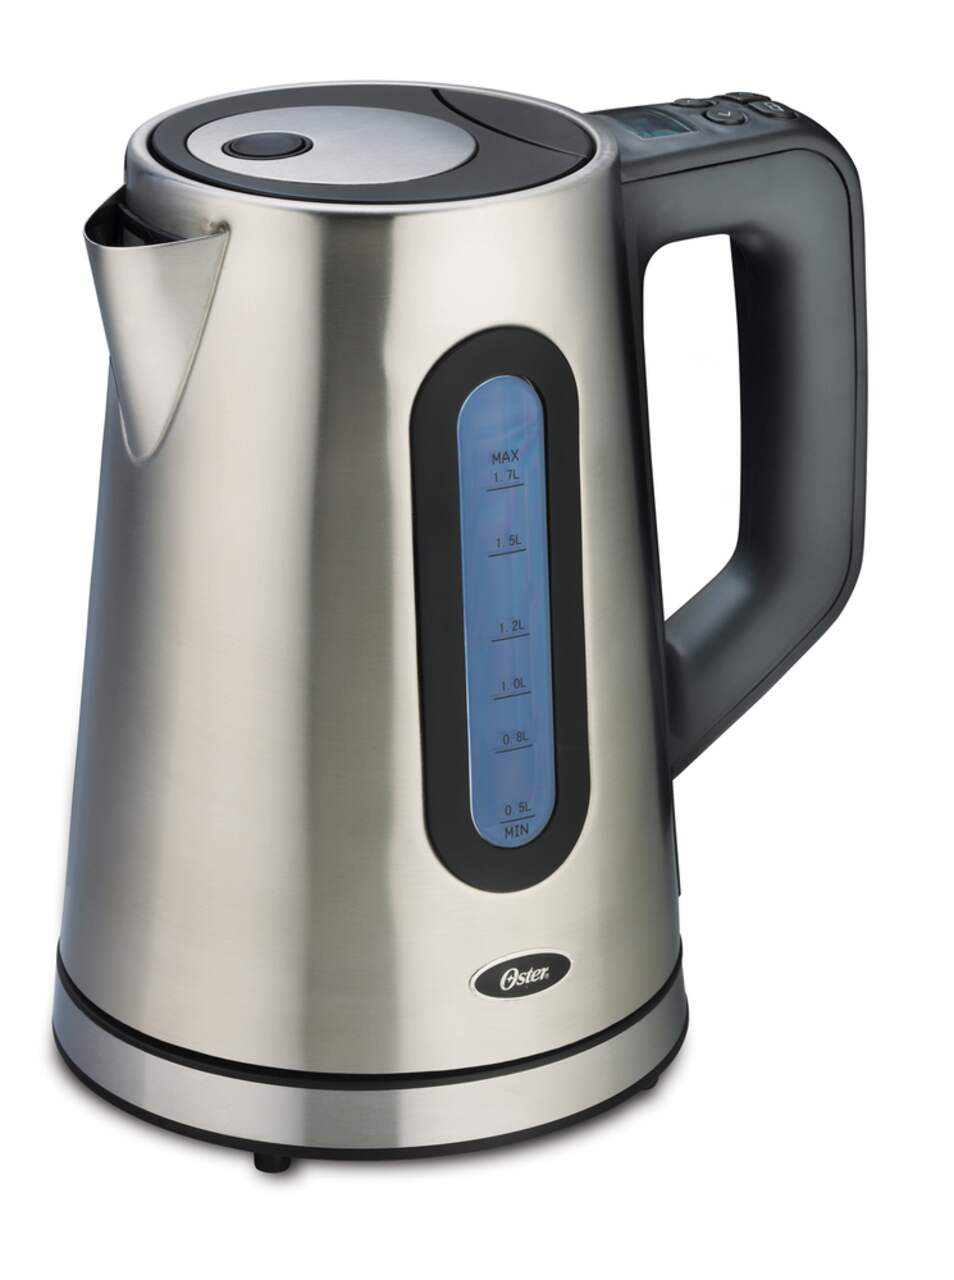 Oster 5970 Electric Kettle Price in India - Buy Oster 5970 Electric Kettle  Online at